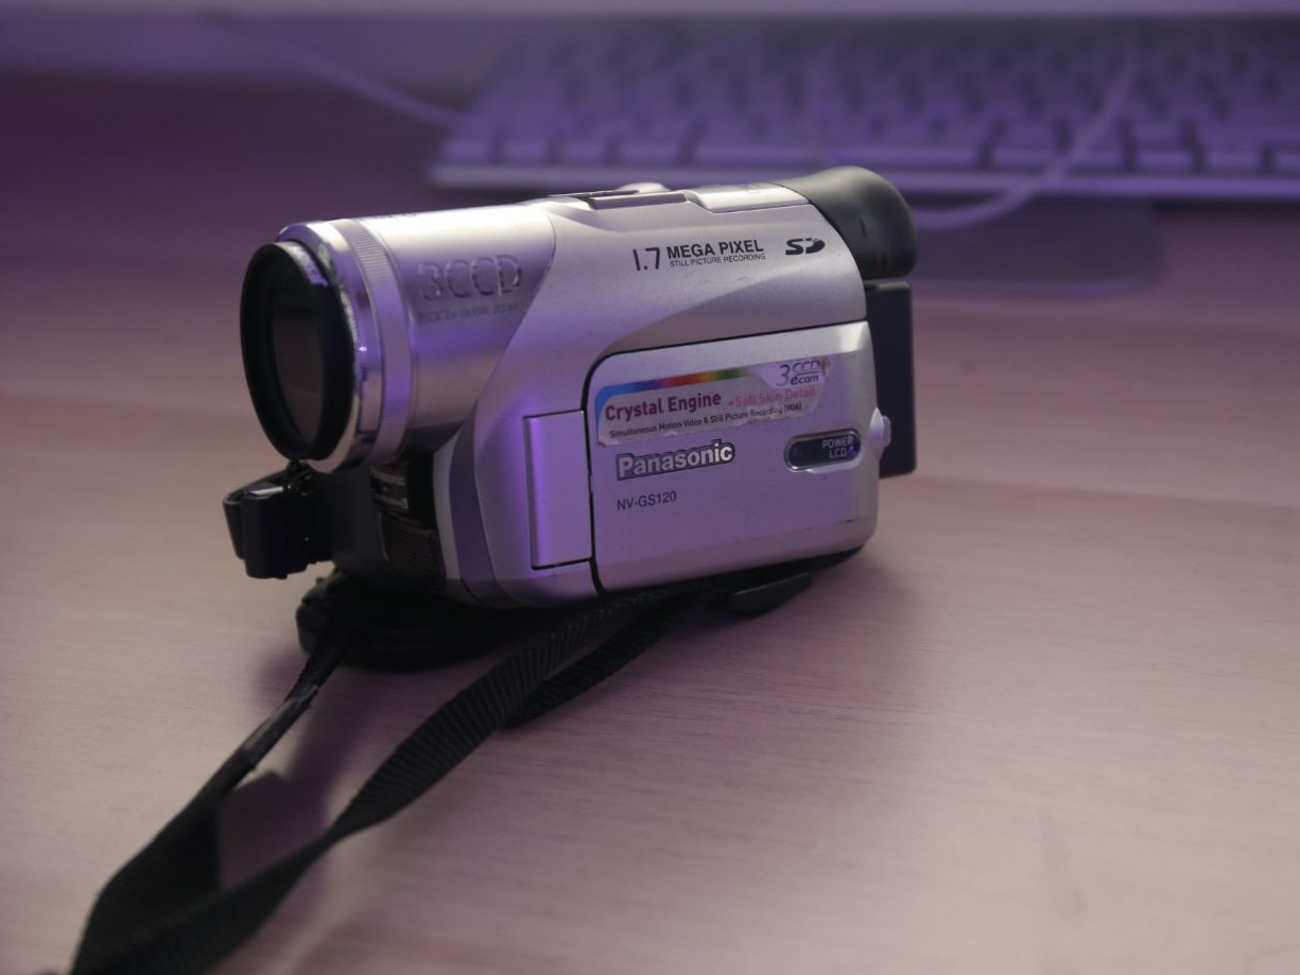 Where Can I Rent A MiniDV Camcorder